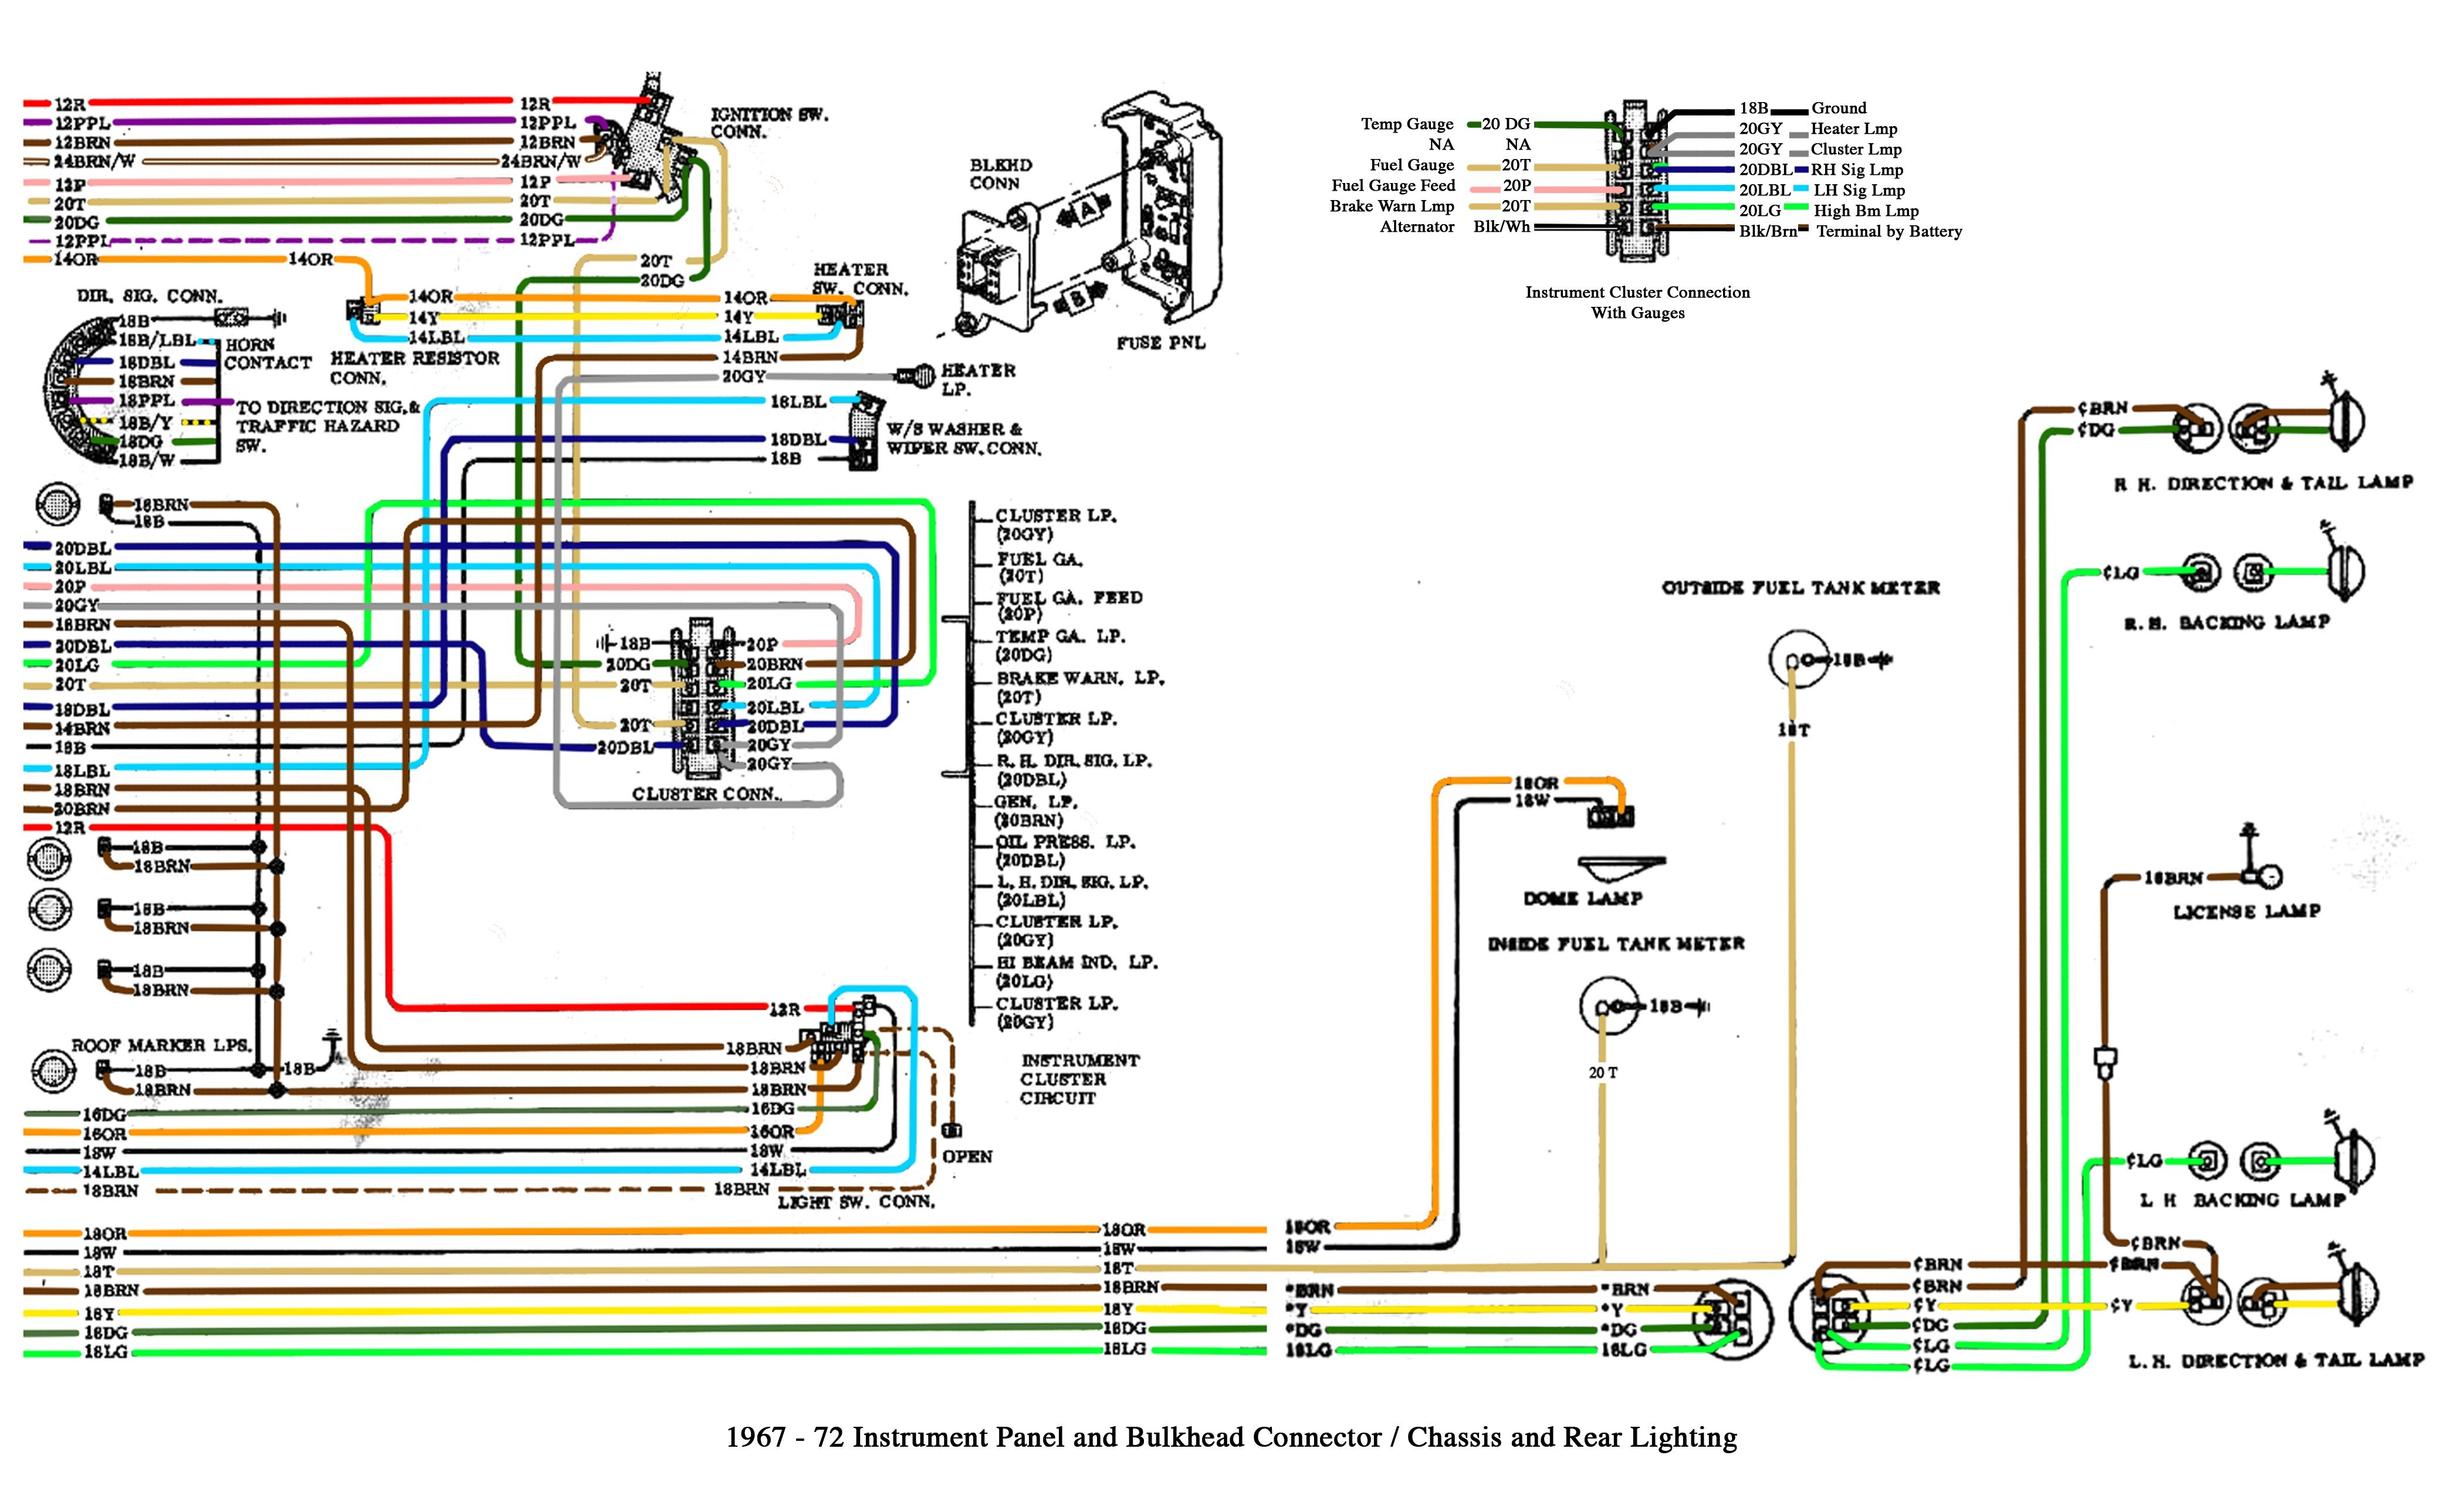 Delco Stereo Wiring Diagram from lh5.googleusercontent.com